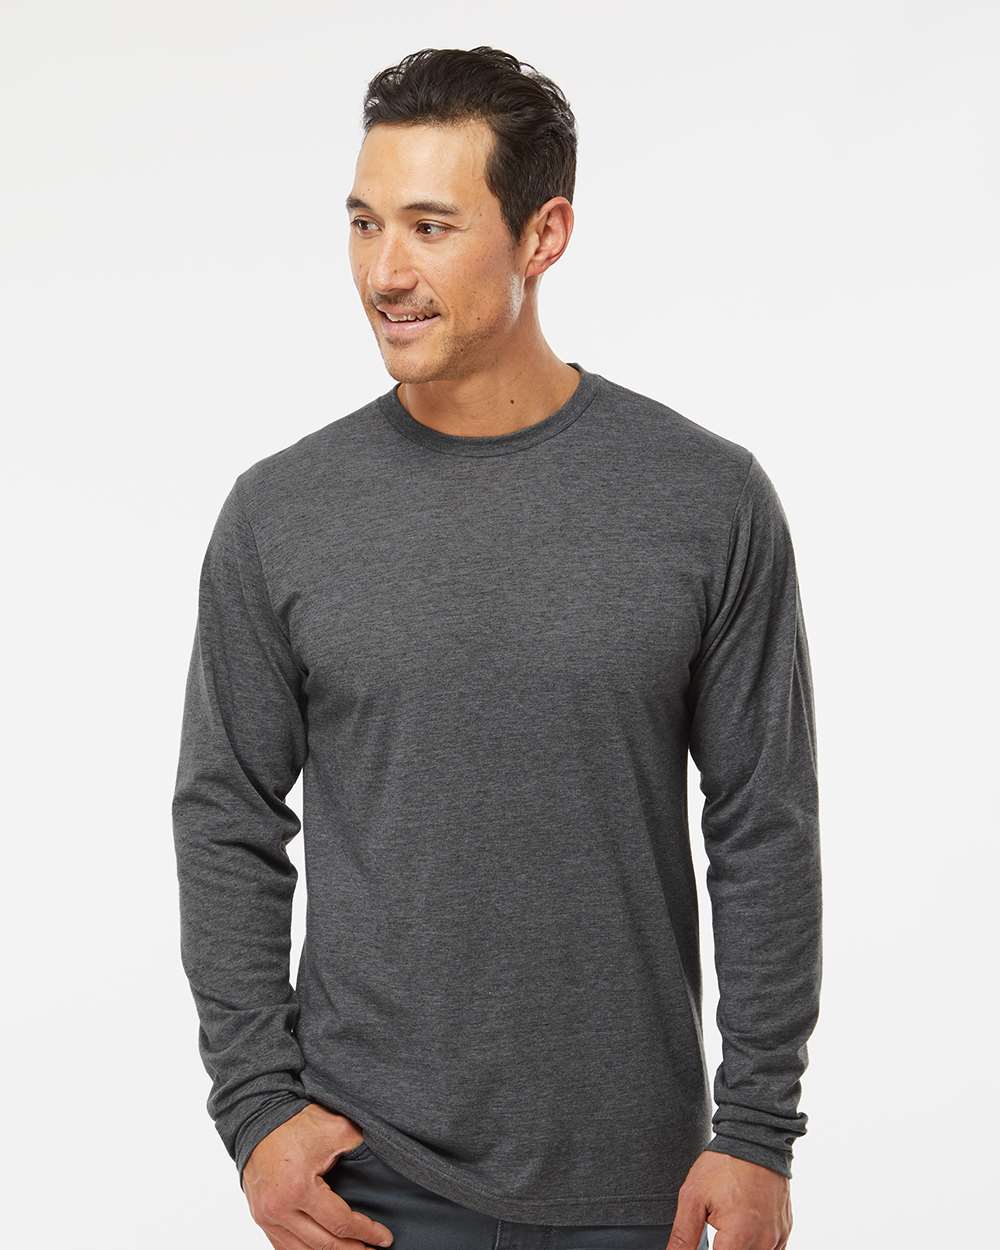 M&O Poly-Blend Long Sleeve T-Shirt 3520 #colormdl_Heather Charcoal